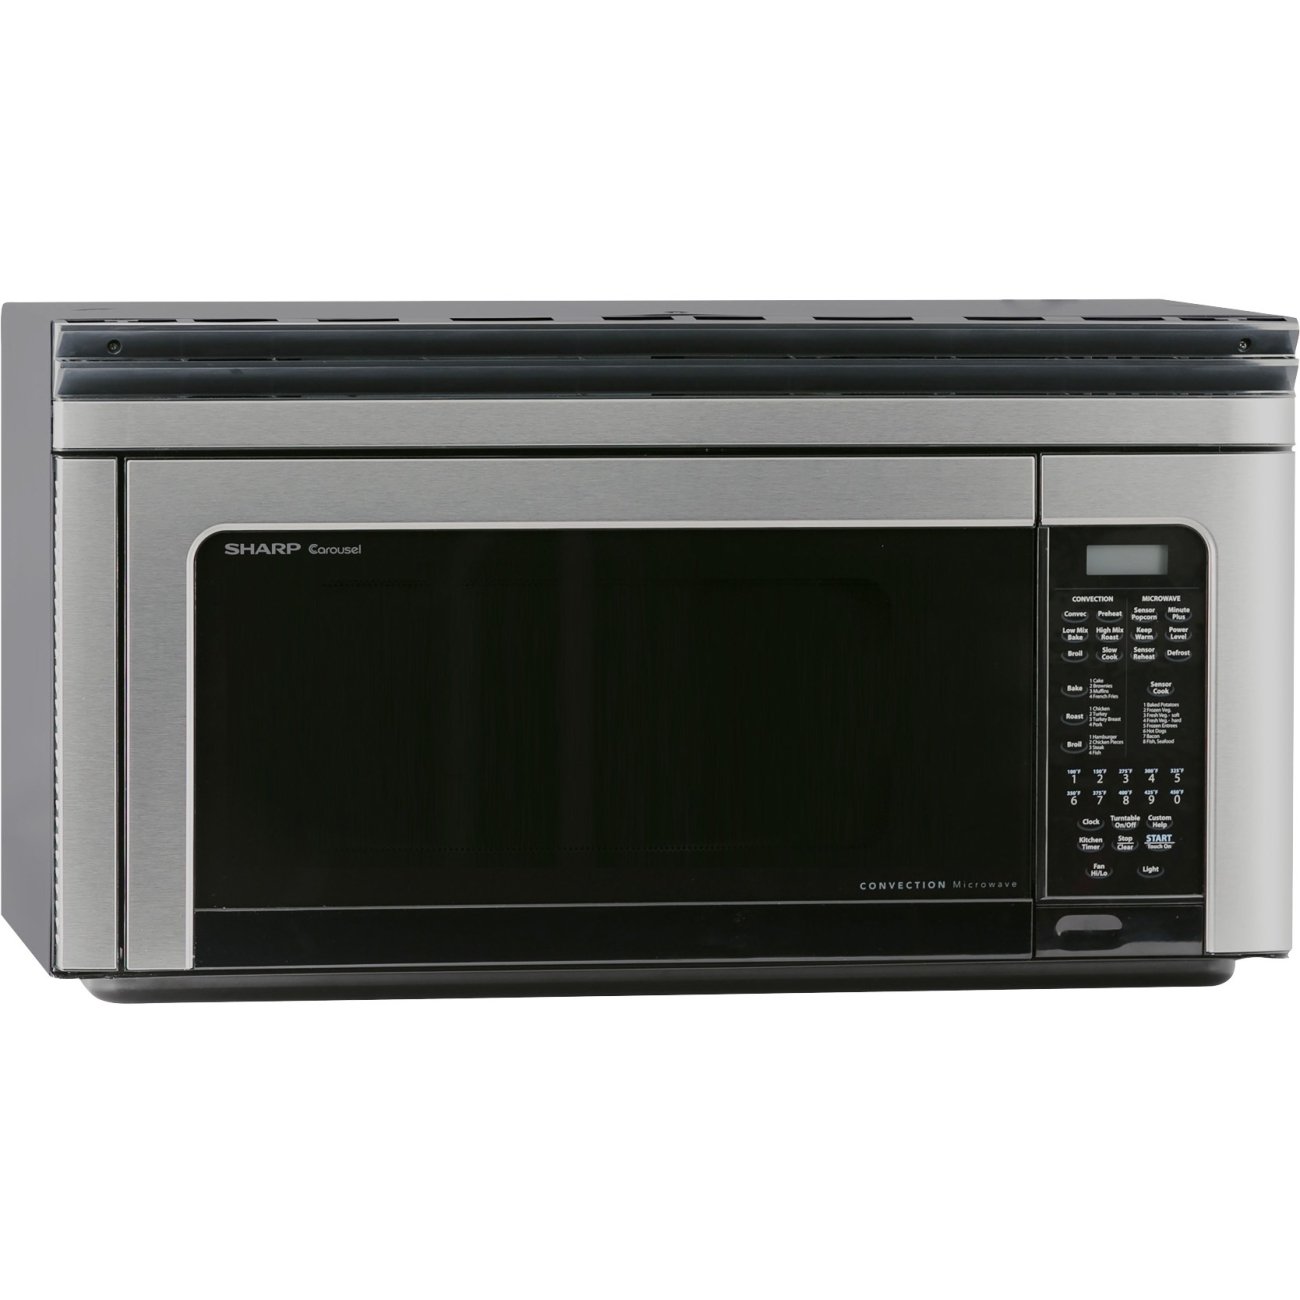 Sharp 1.1 Cu. Ft. 850W Over-The-Range Convection Microwave Oven in